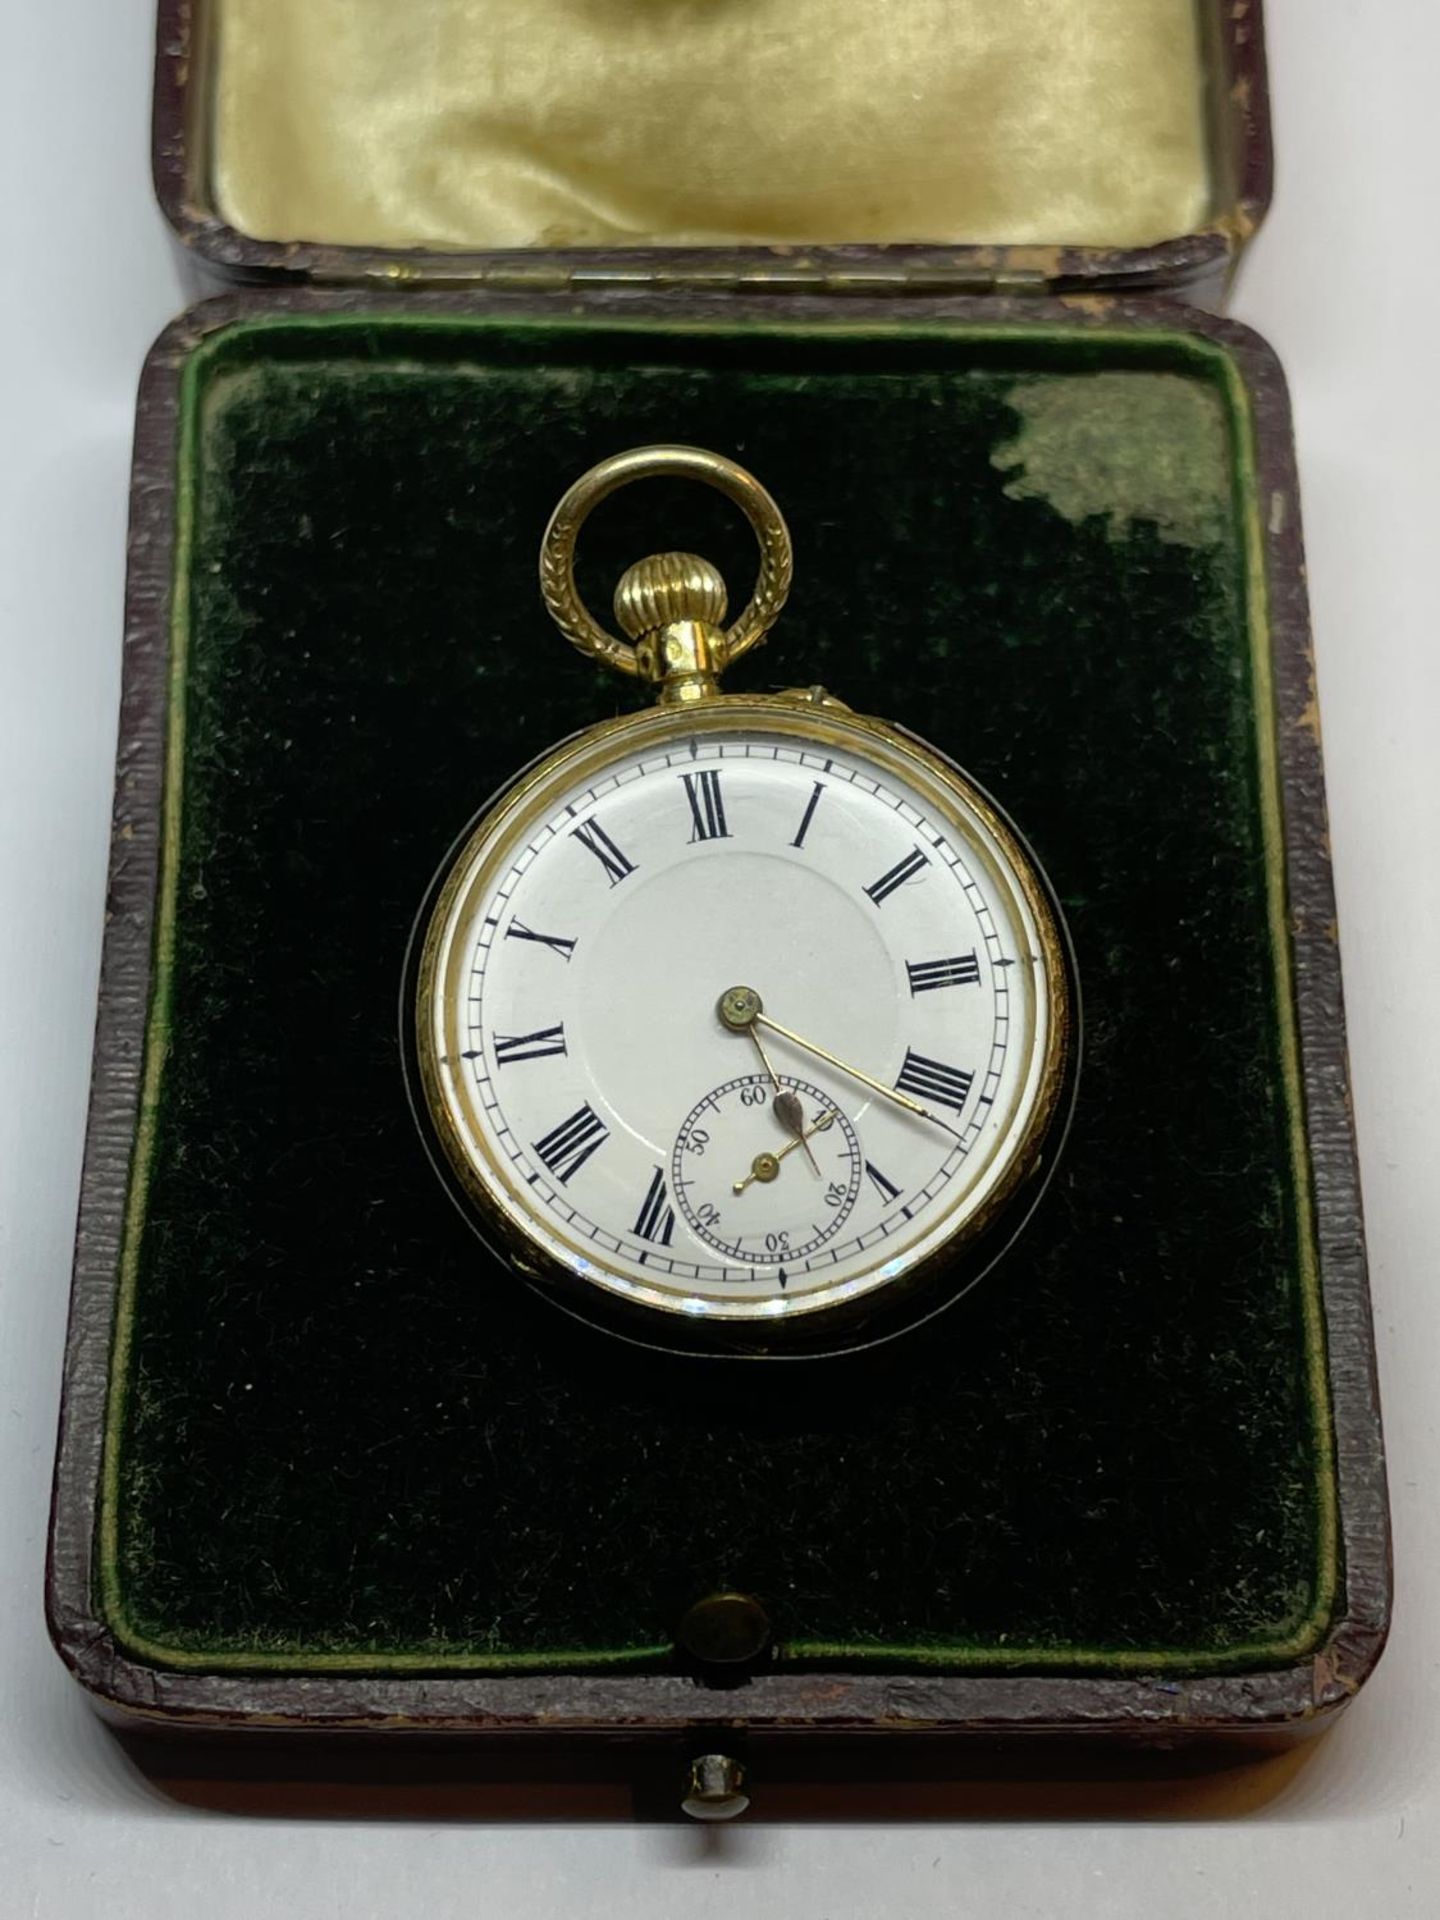 AN 18CT GOLD TOP WIND POCKET WATCH WITH WHITE ENAMELLED DIAL AND GOLD HANDS, WITH ORIGINAL BOX